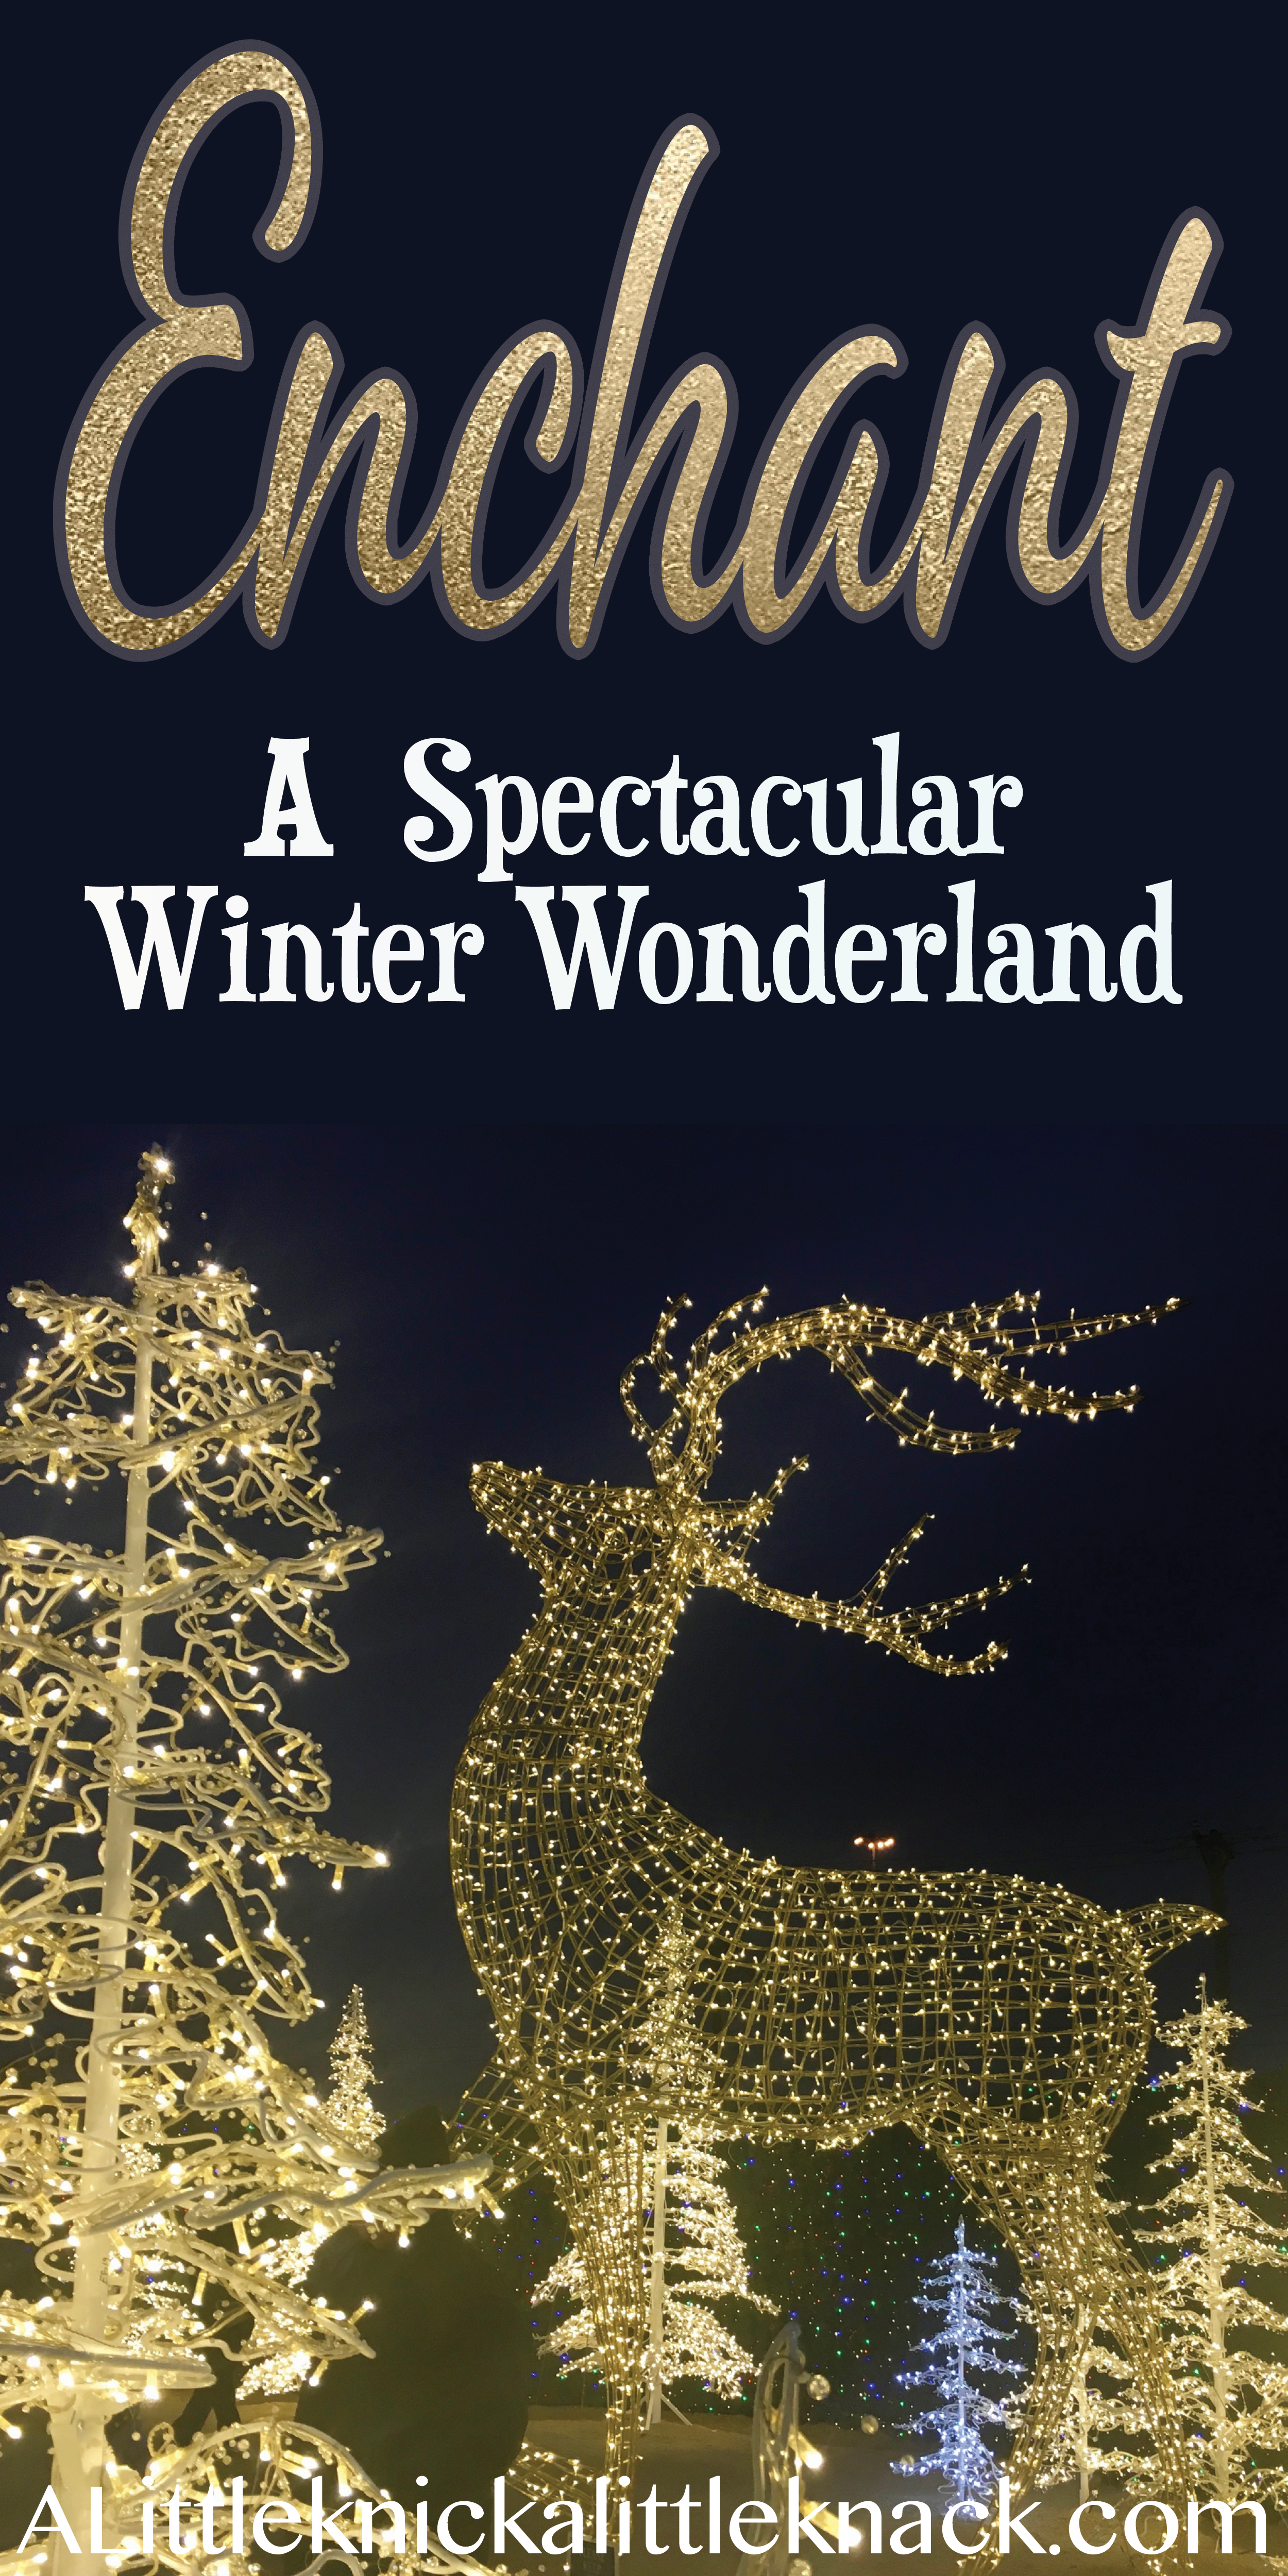 Looking for something fun to do with the kids this winter? Head to Enchant winter wonderland. #Christmas